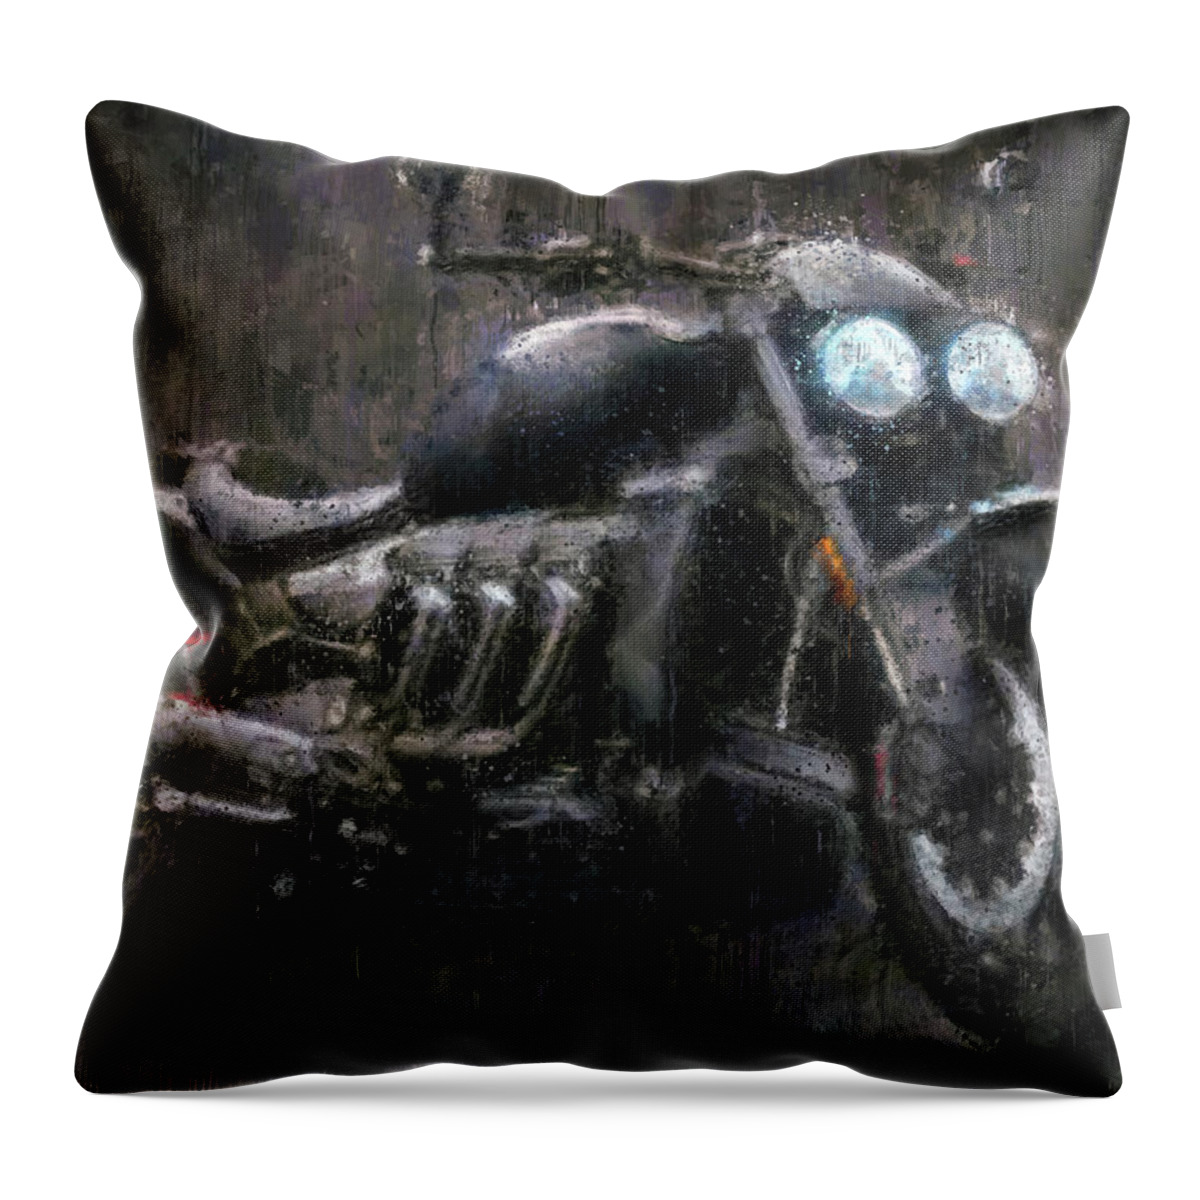 Motorcycle Throw Pillow featuring the painting Triumph Rocket 3 Motorcycle by Vart by Vart Studio